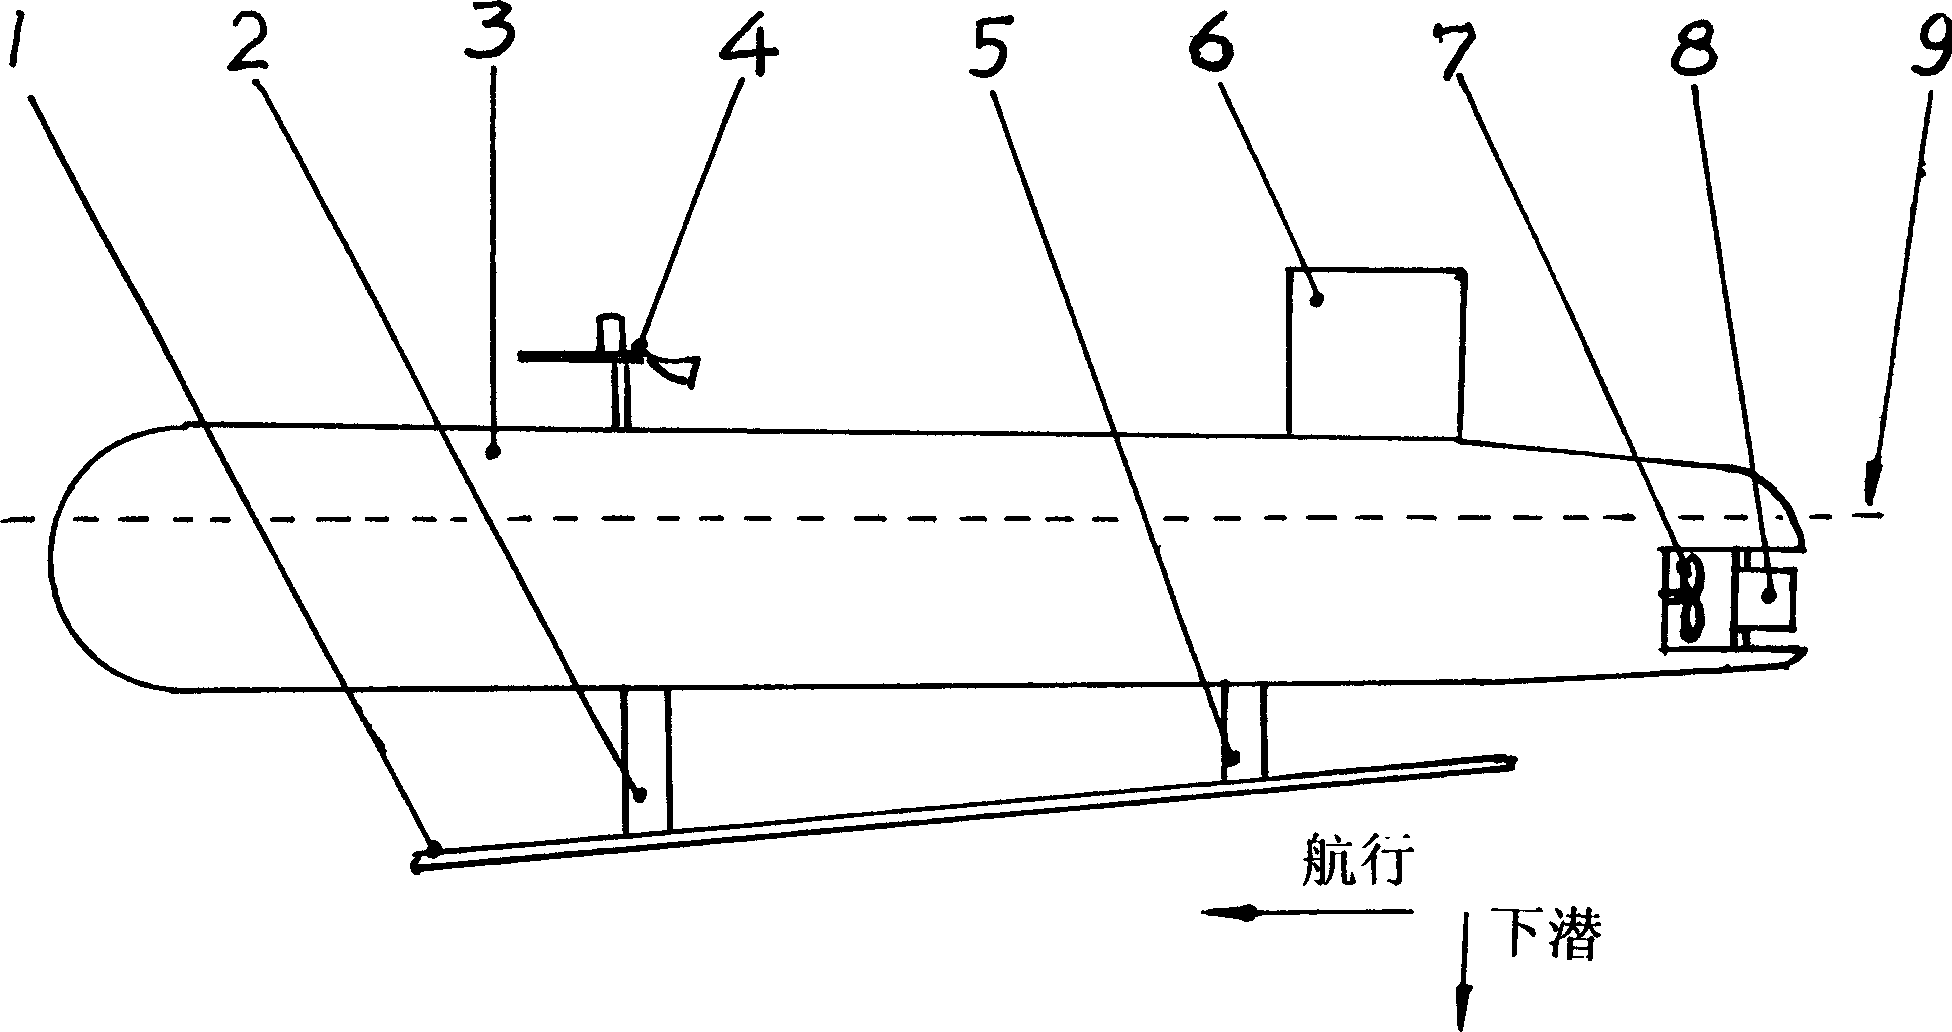 Auxiliary mechanism and method of forcing submarine to dive or lift fast